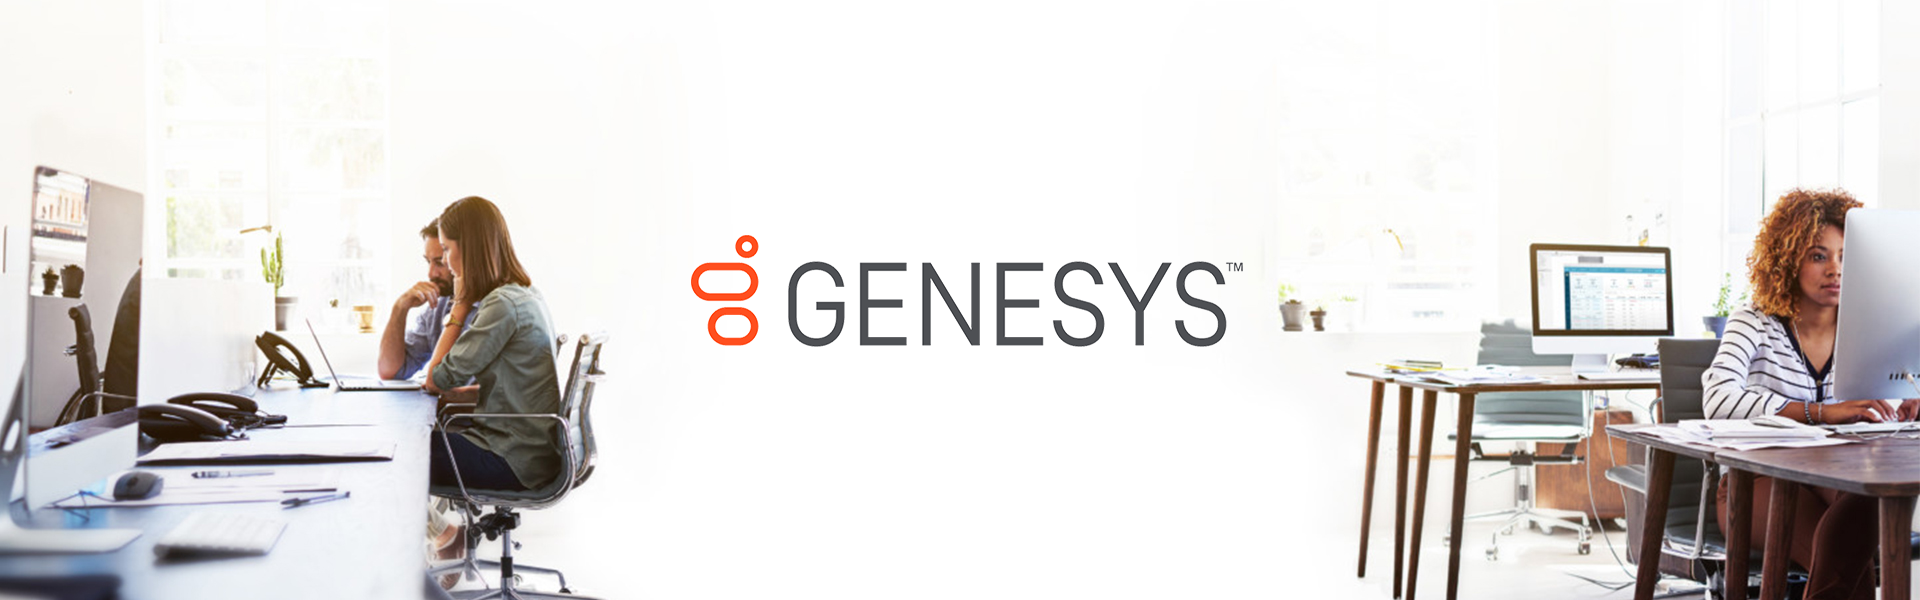 Review Genesys PureCloud: All-in-one cloud contact centre solution - Appvizer